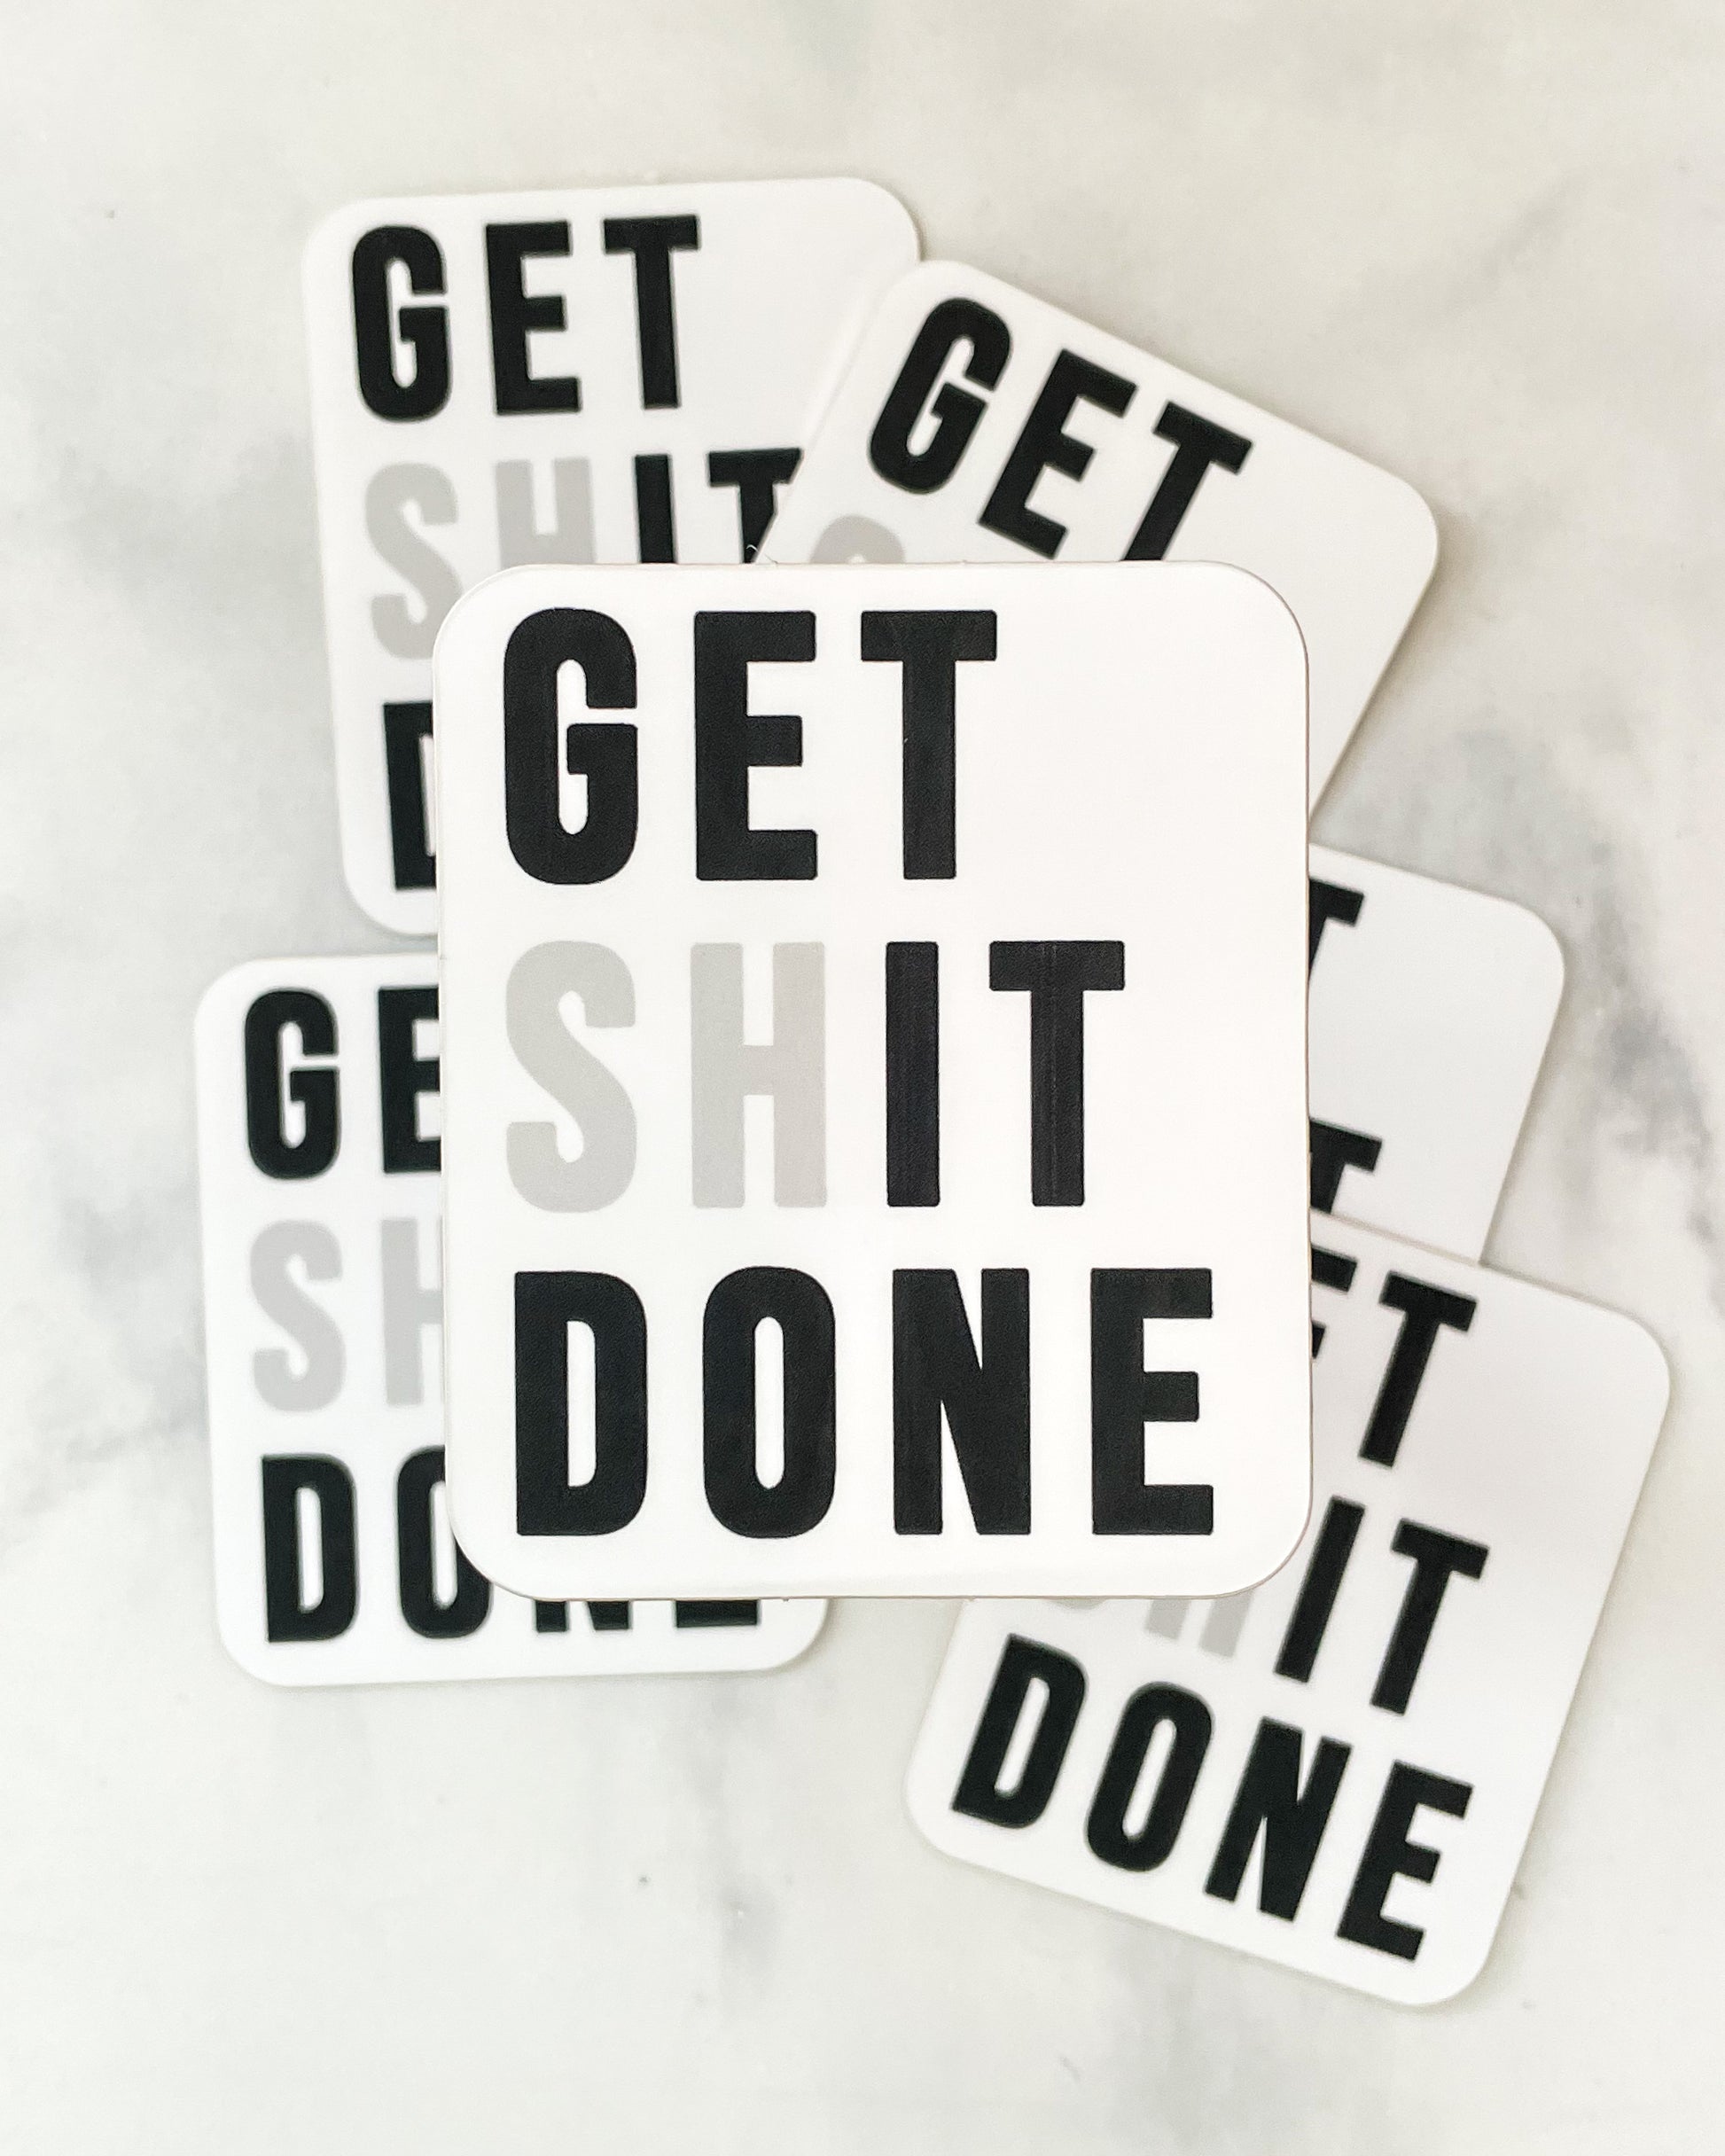 get shit done wallpaper